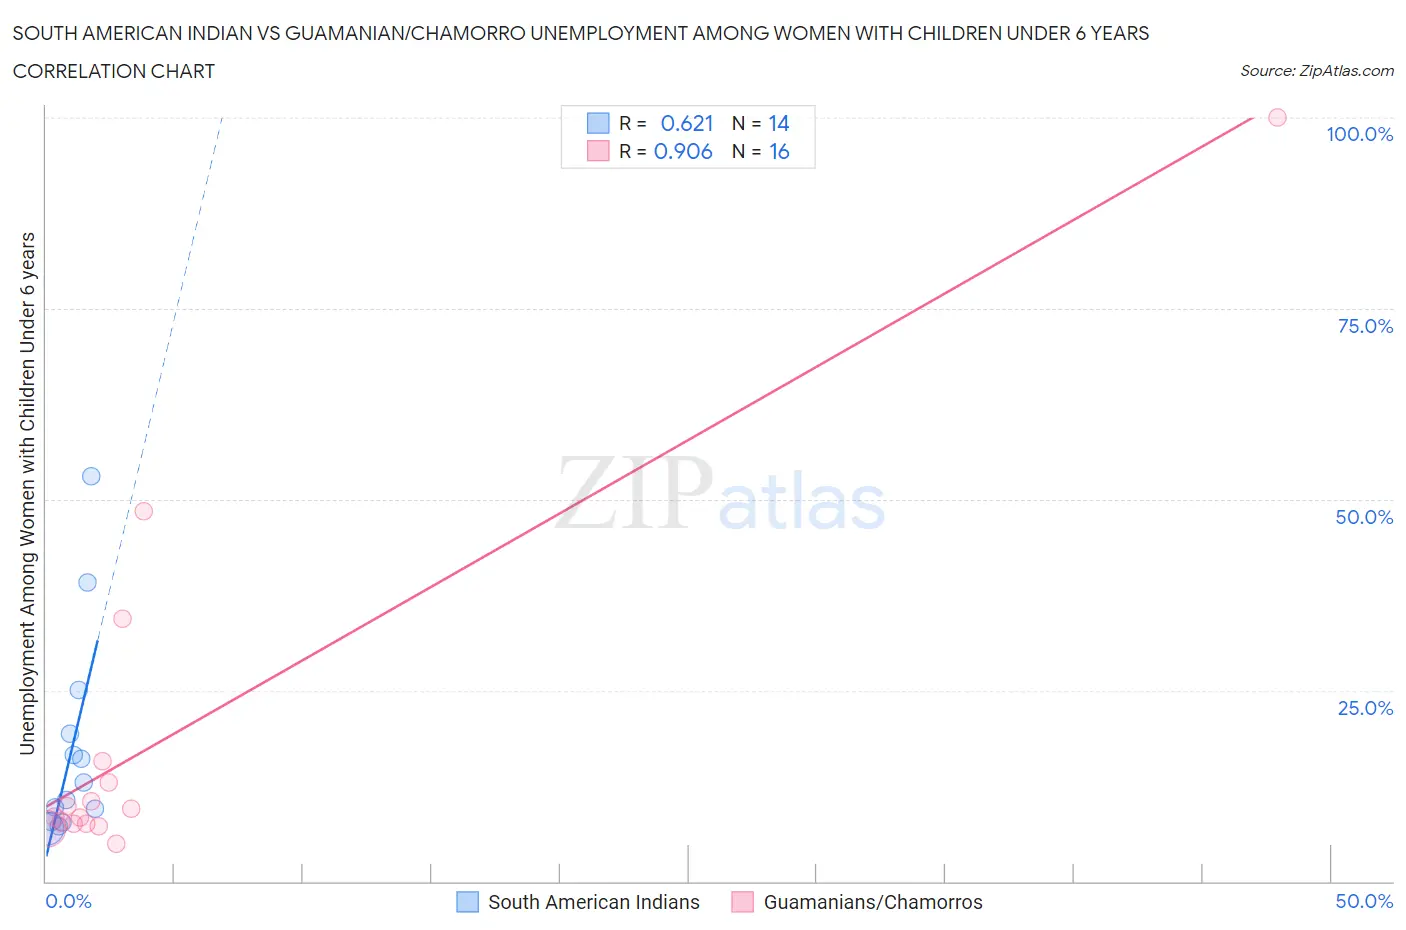 South American Indian vs Guamanian/Chamorro Unemployment Among Women with Children Under 6 years